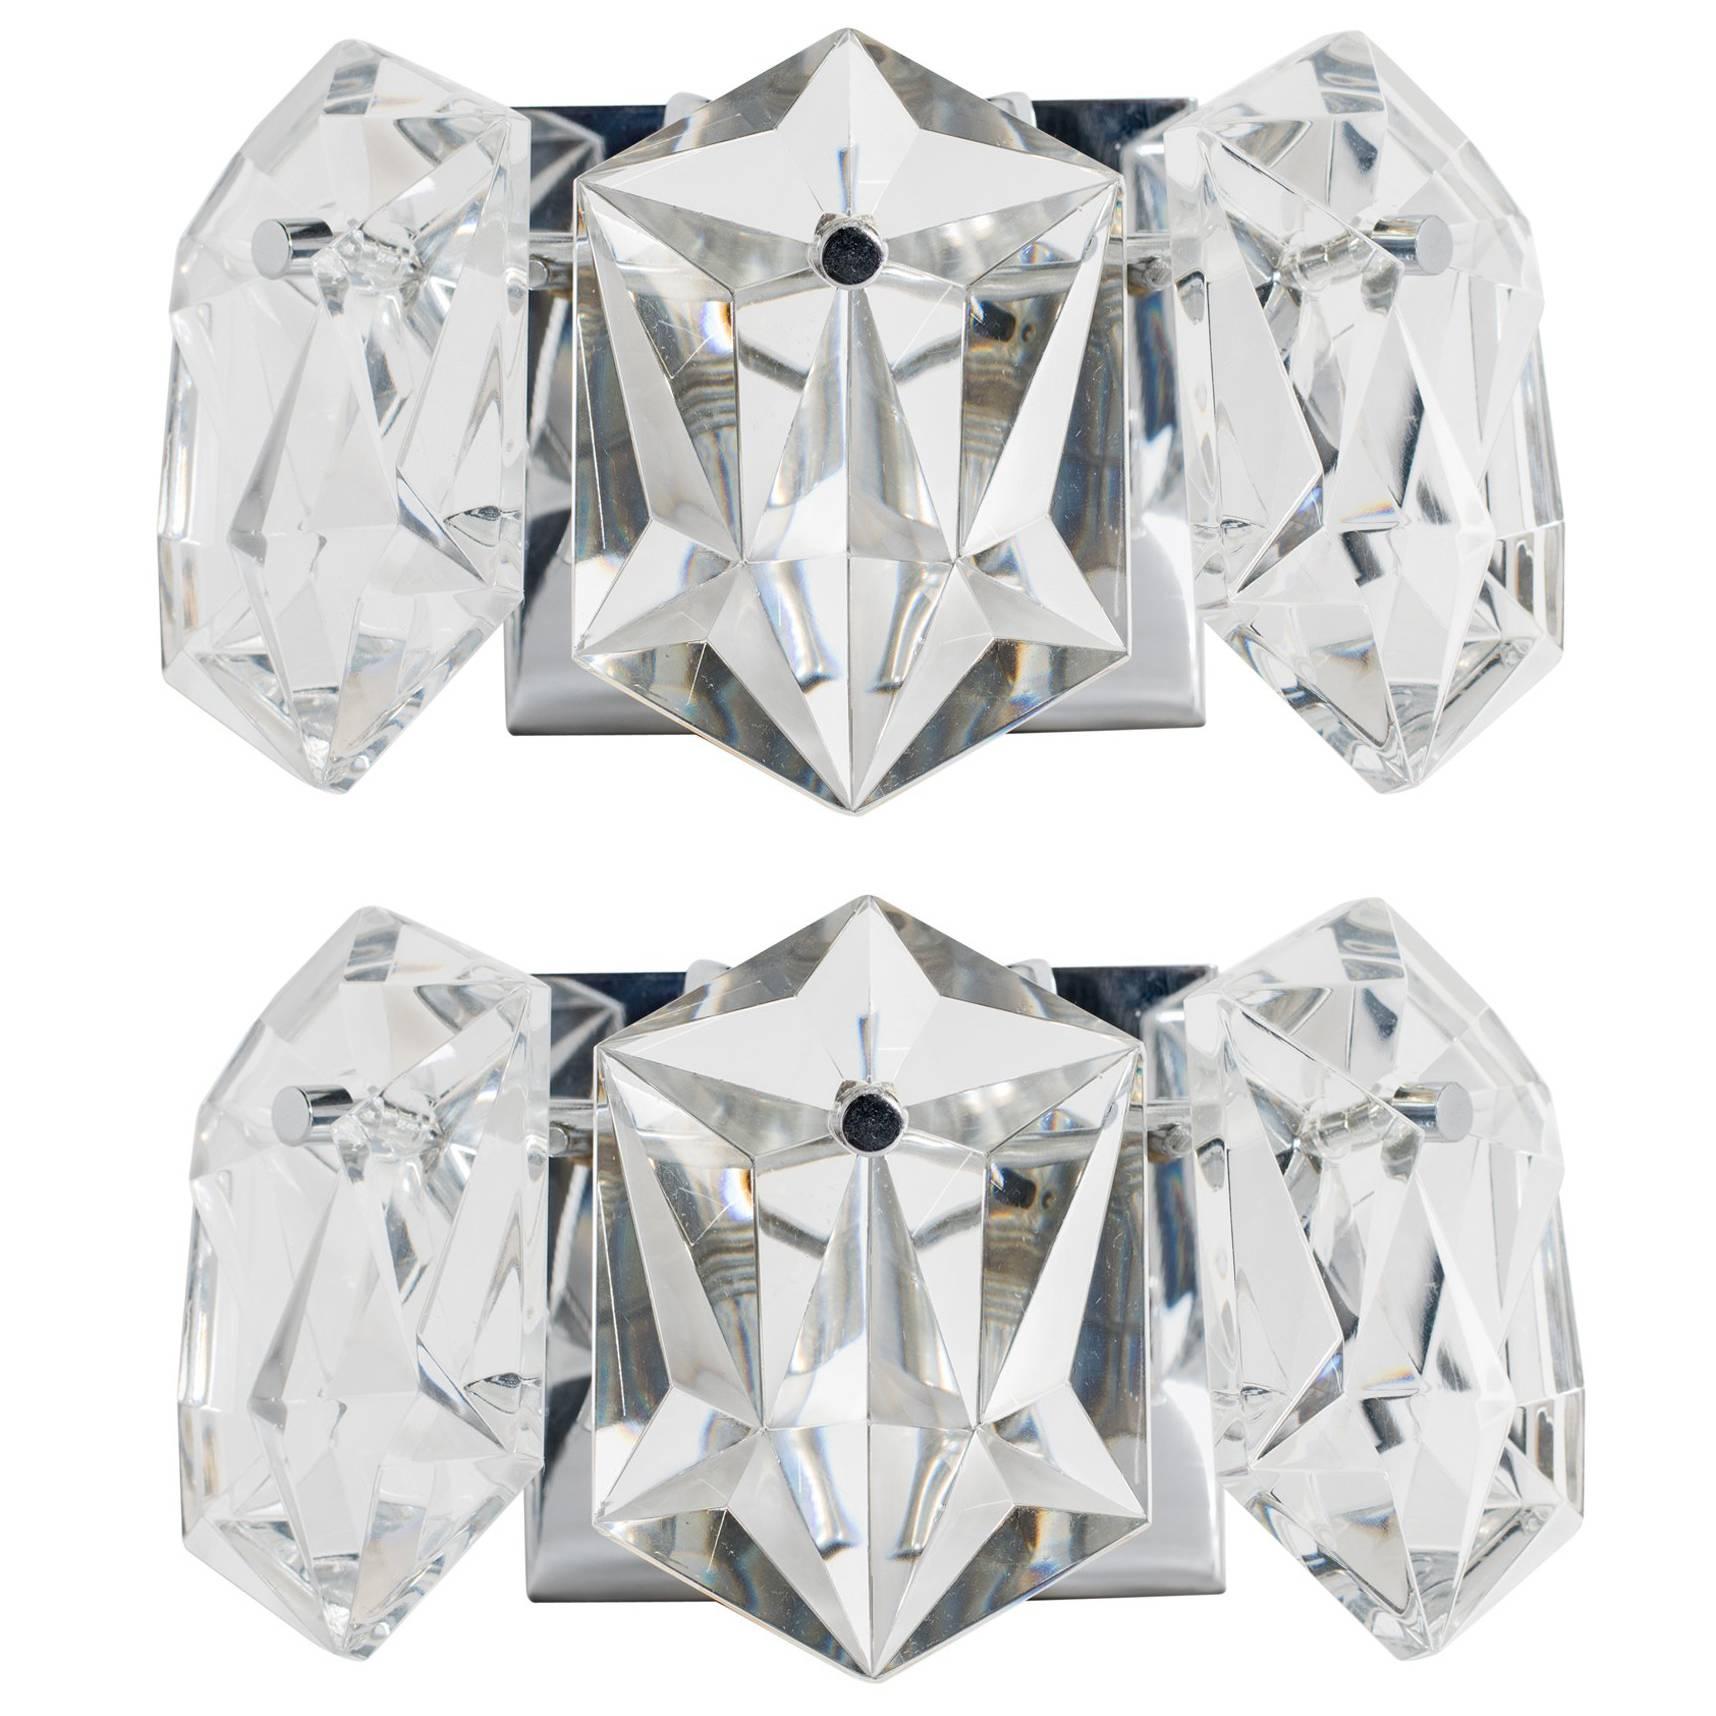 Exquisite pair of petite Mid-Century Modern sconces, fitted with three faceted crystal prisms. Simple floating frames are finished in polished nickel with matching fittings. Newly rewired and fitted with two lights each. Perfect scale for powder